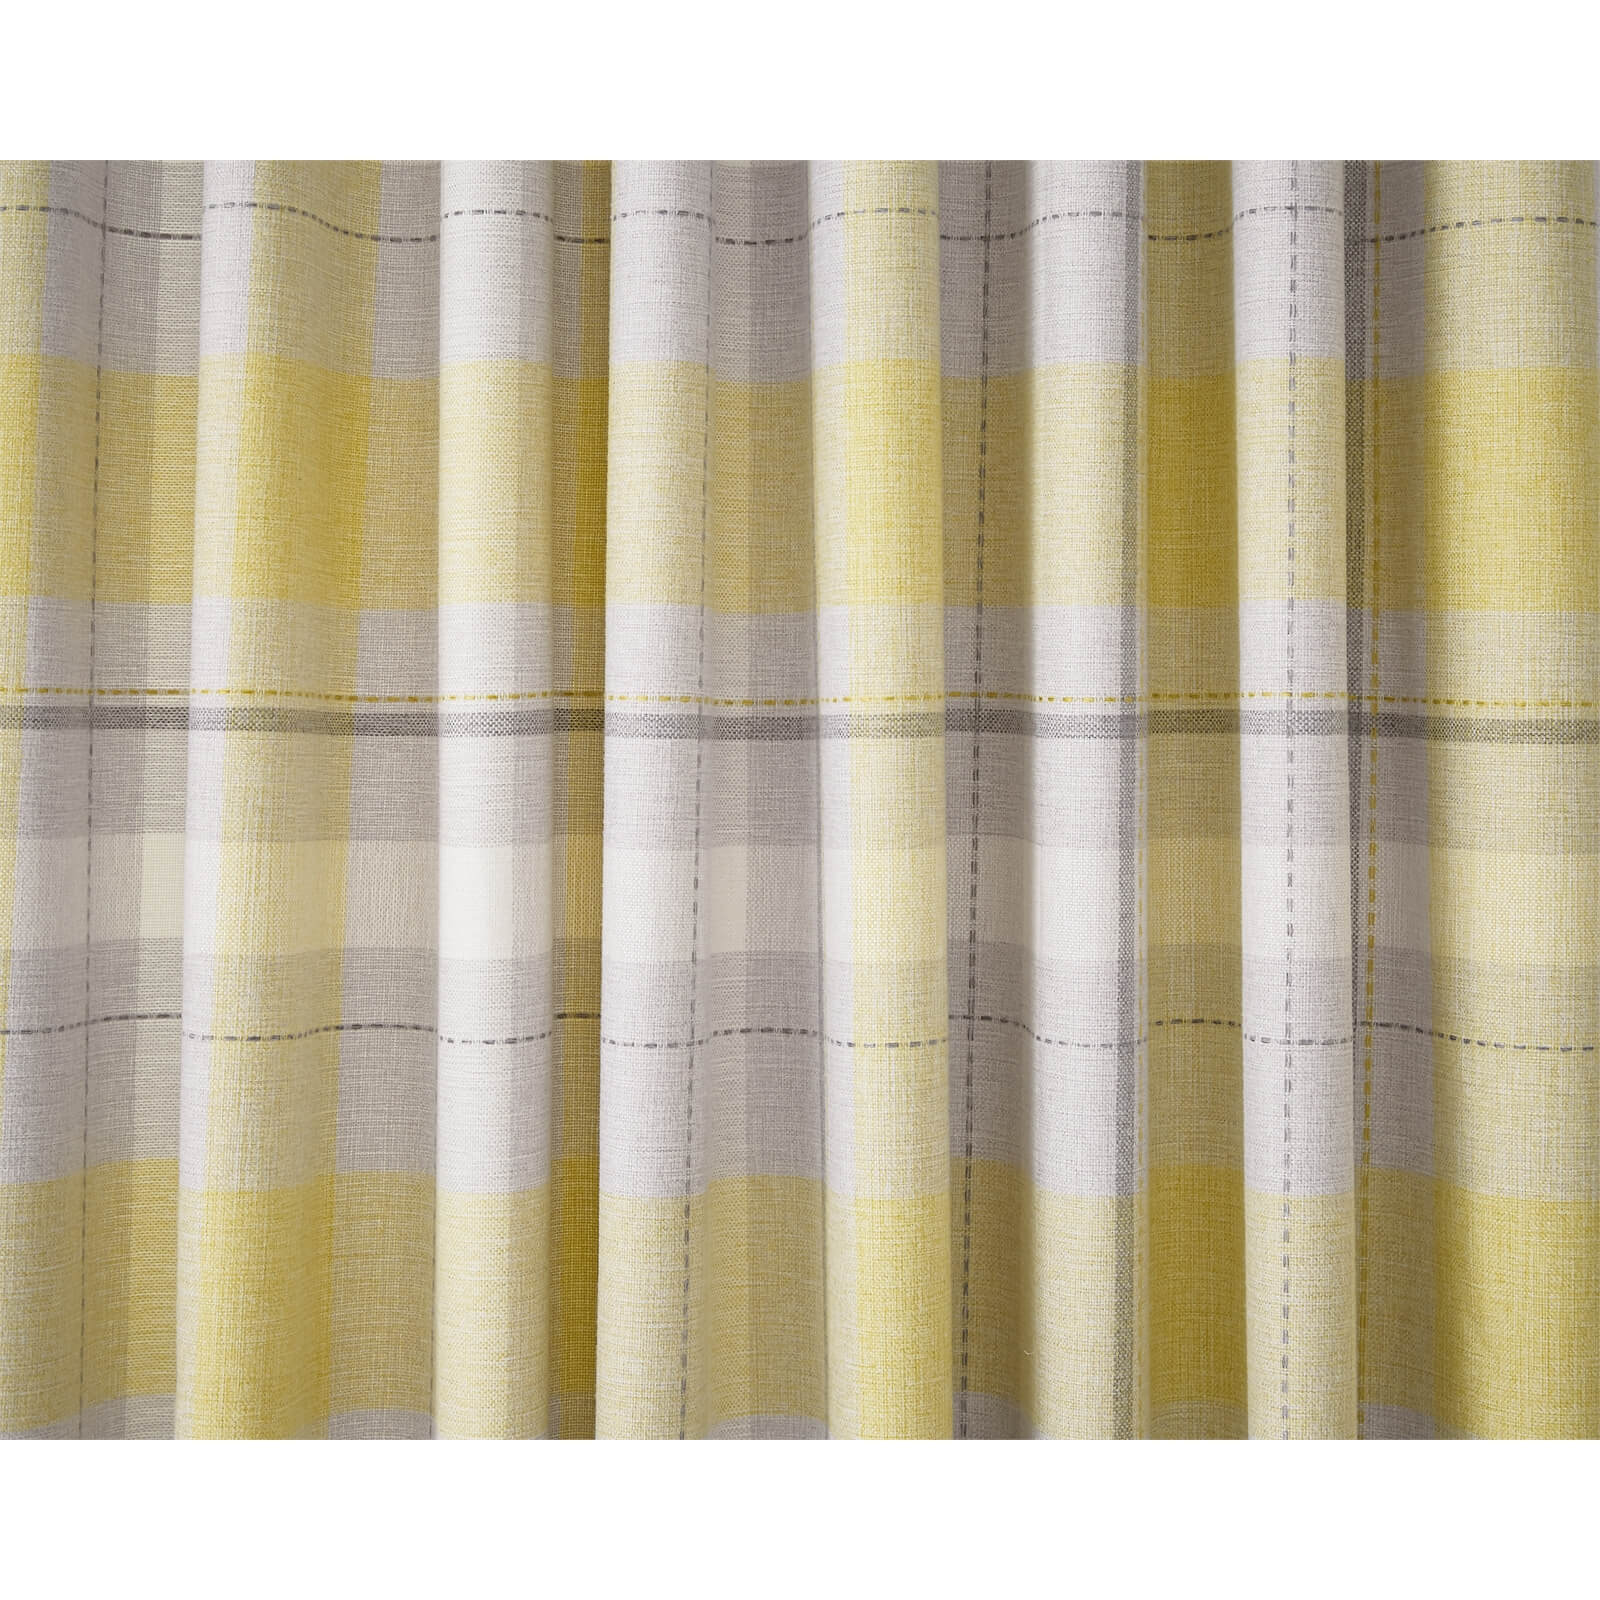 Helena Springfield Nora Lined Curtains 90 x 90 - Chartreuse